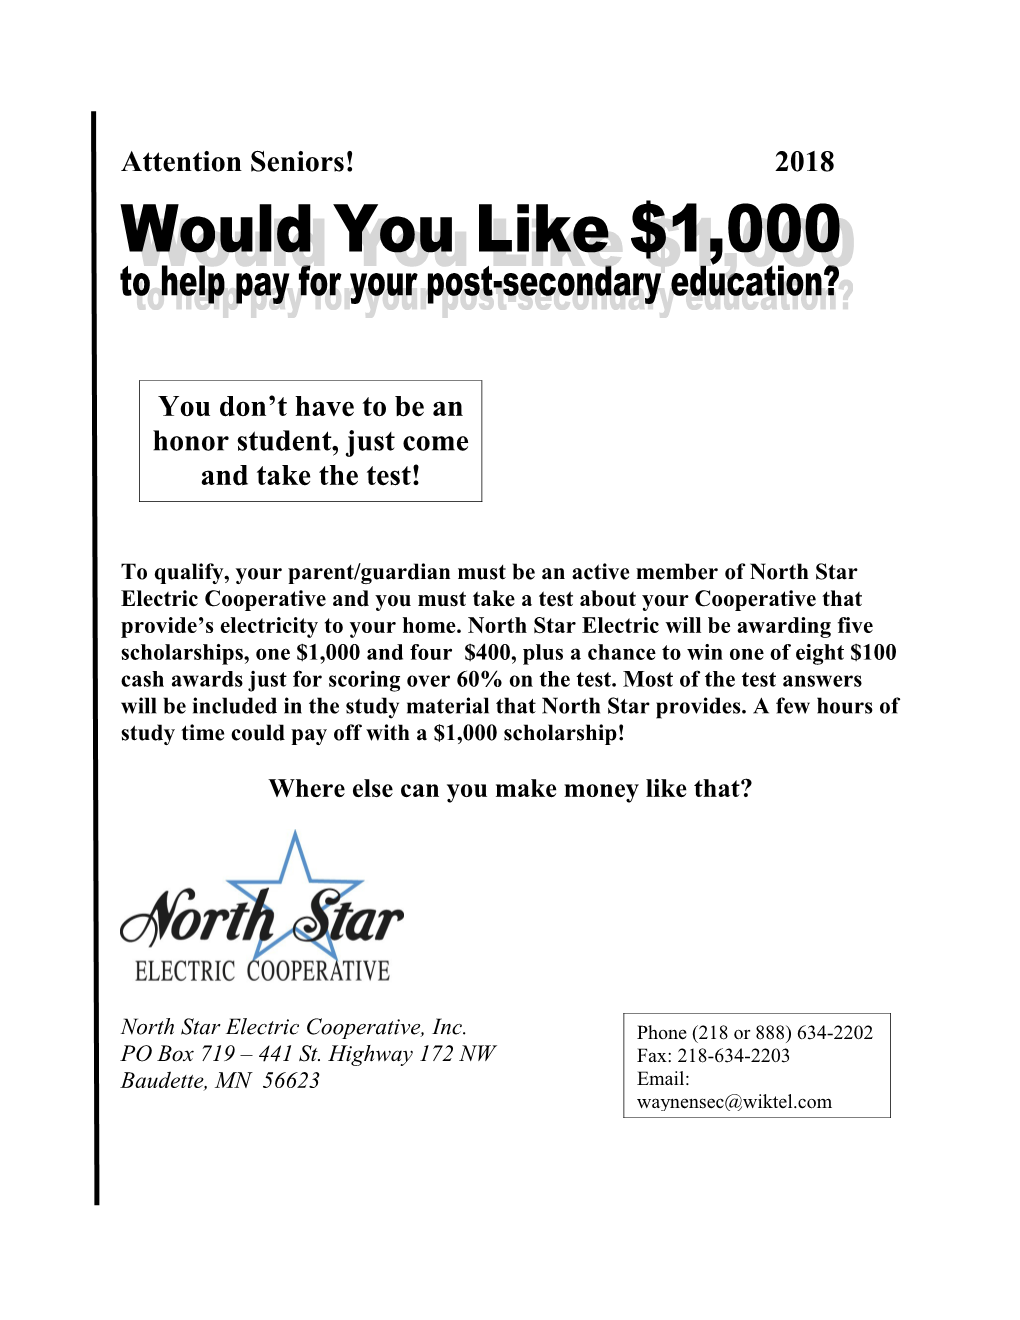 North Star Electric Cooperative